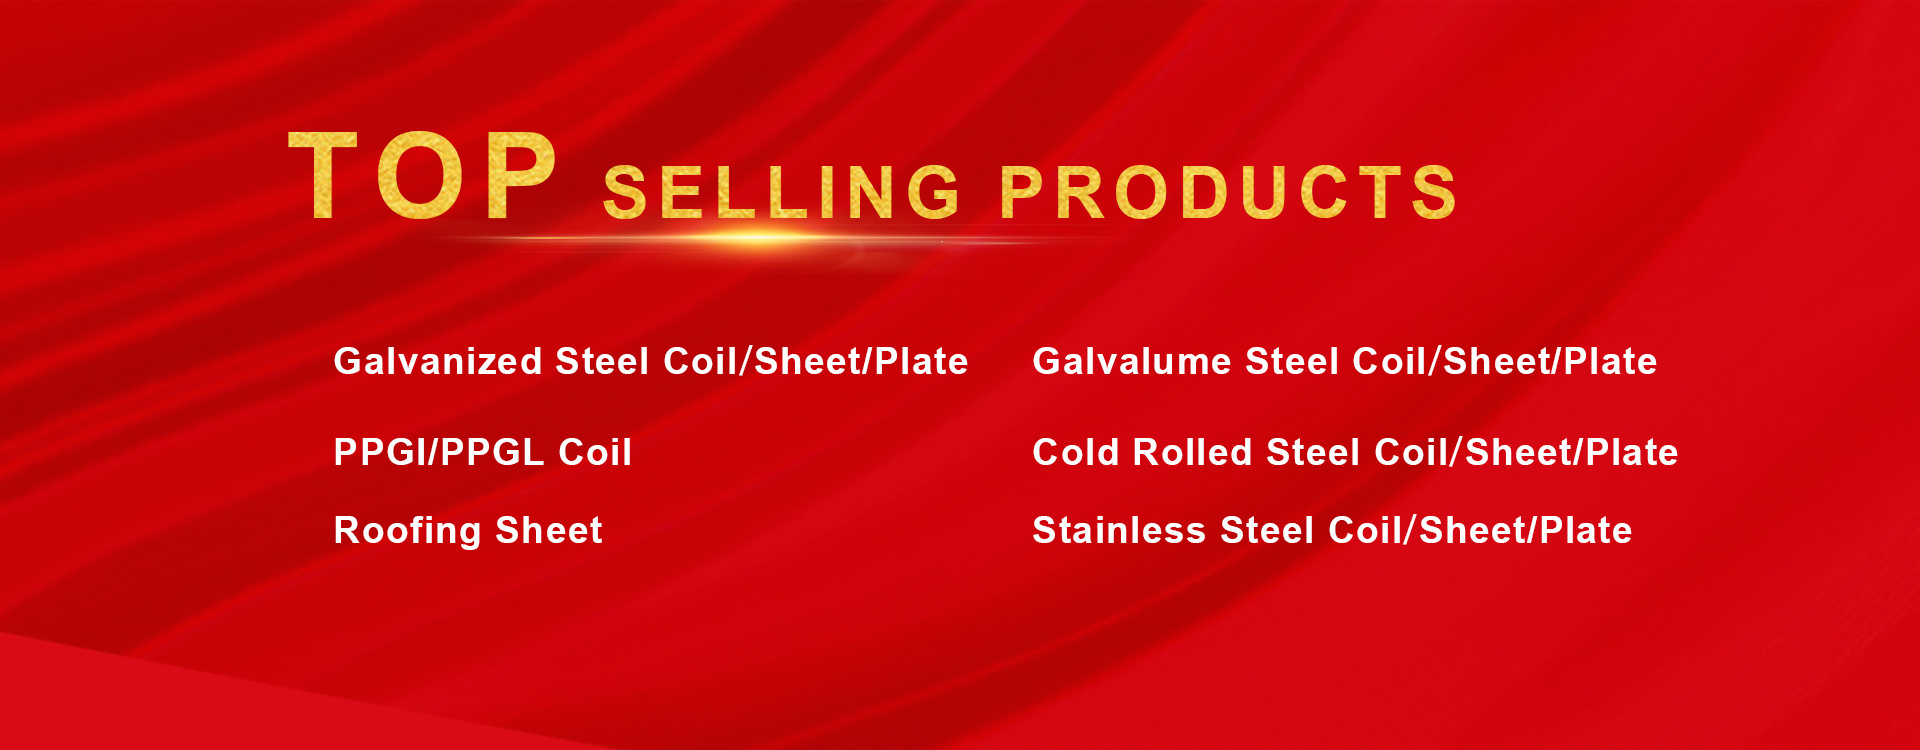 TOP SELLING PRODUCTS